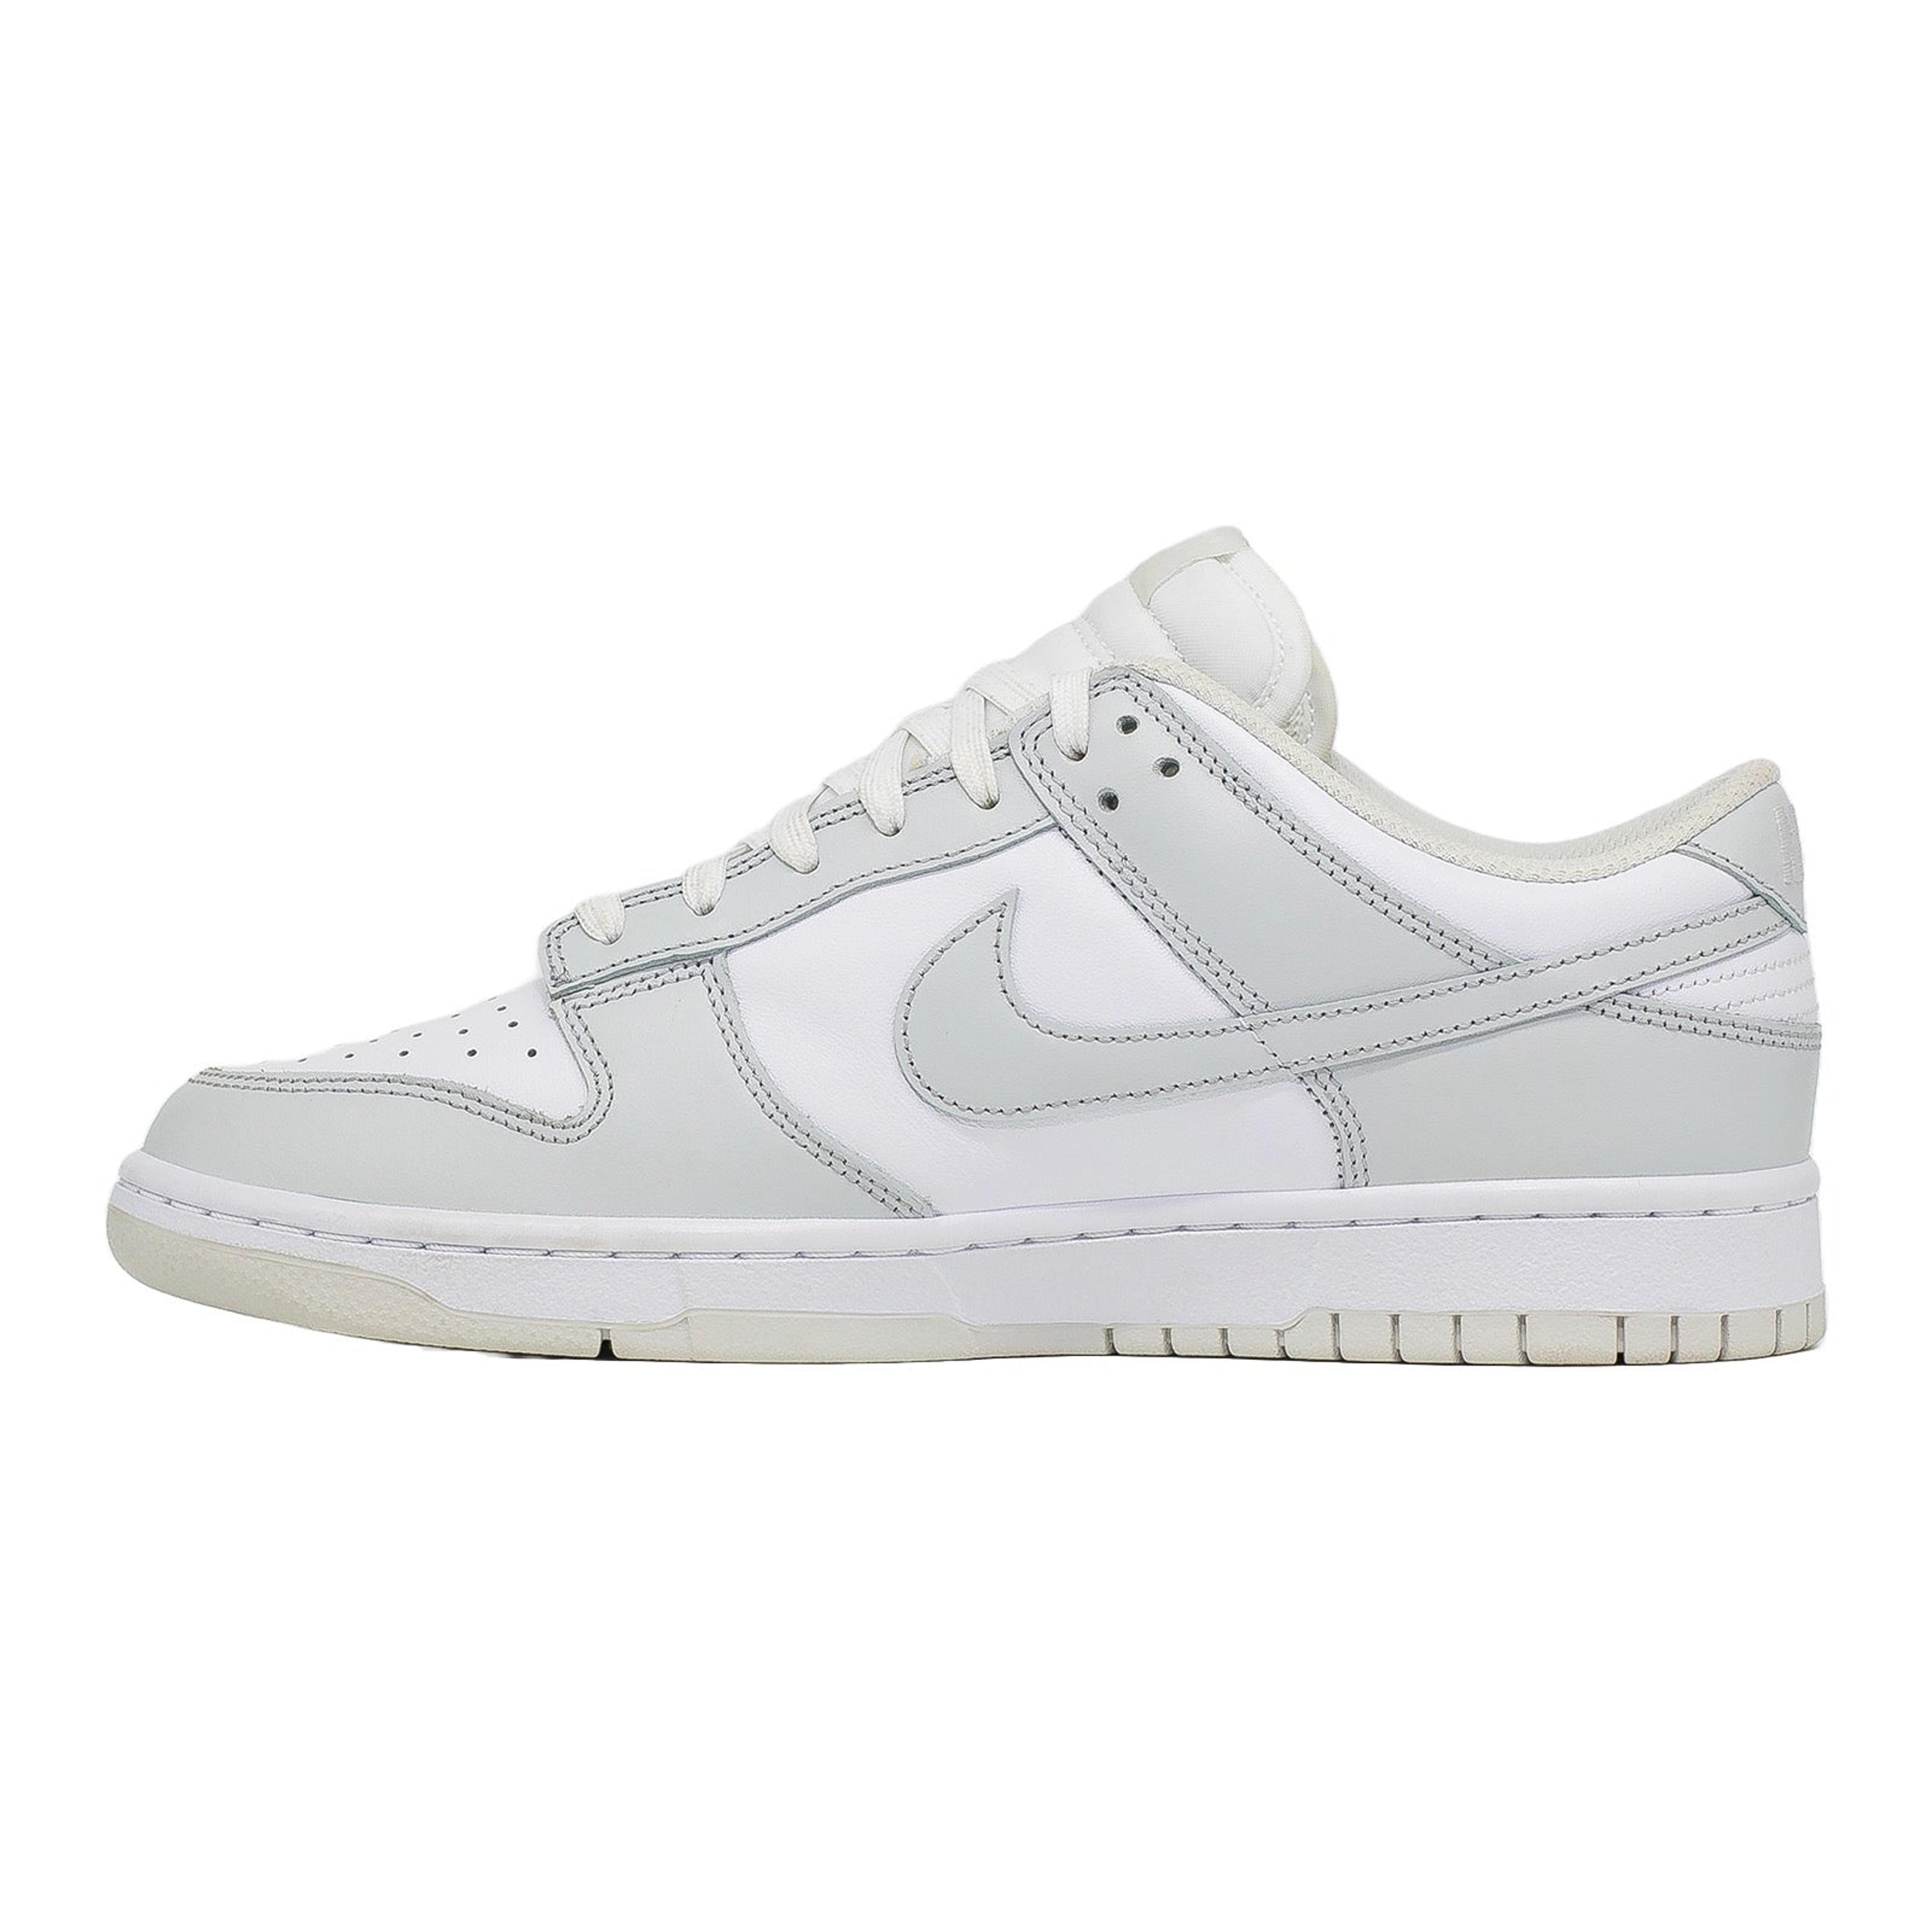 Alternate View 1 of Women's Nike Dunk Low, Photon Dust